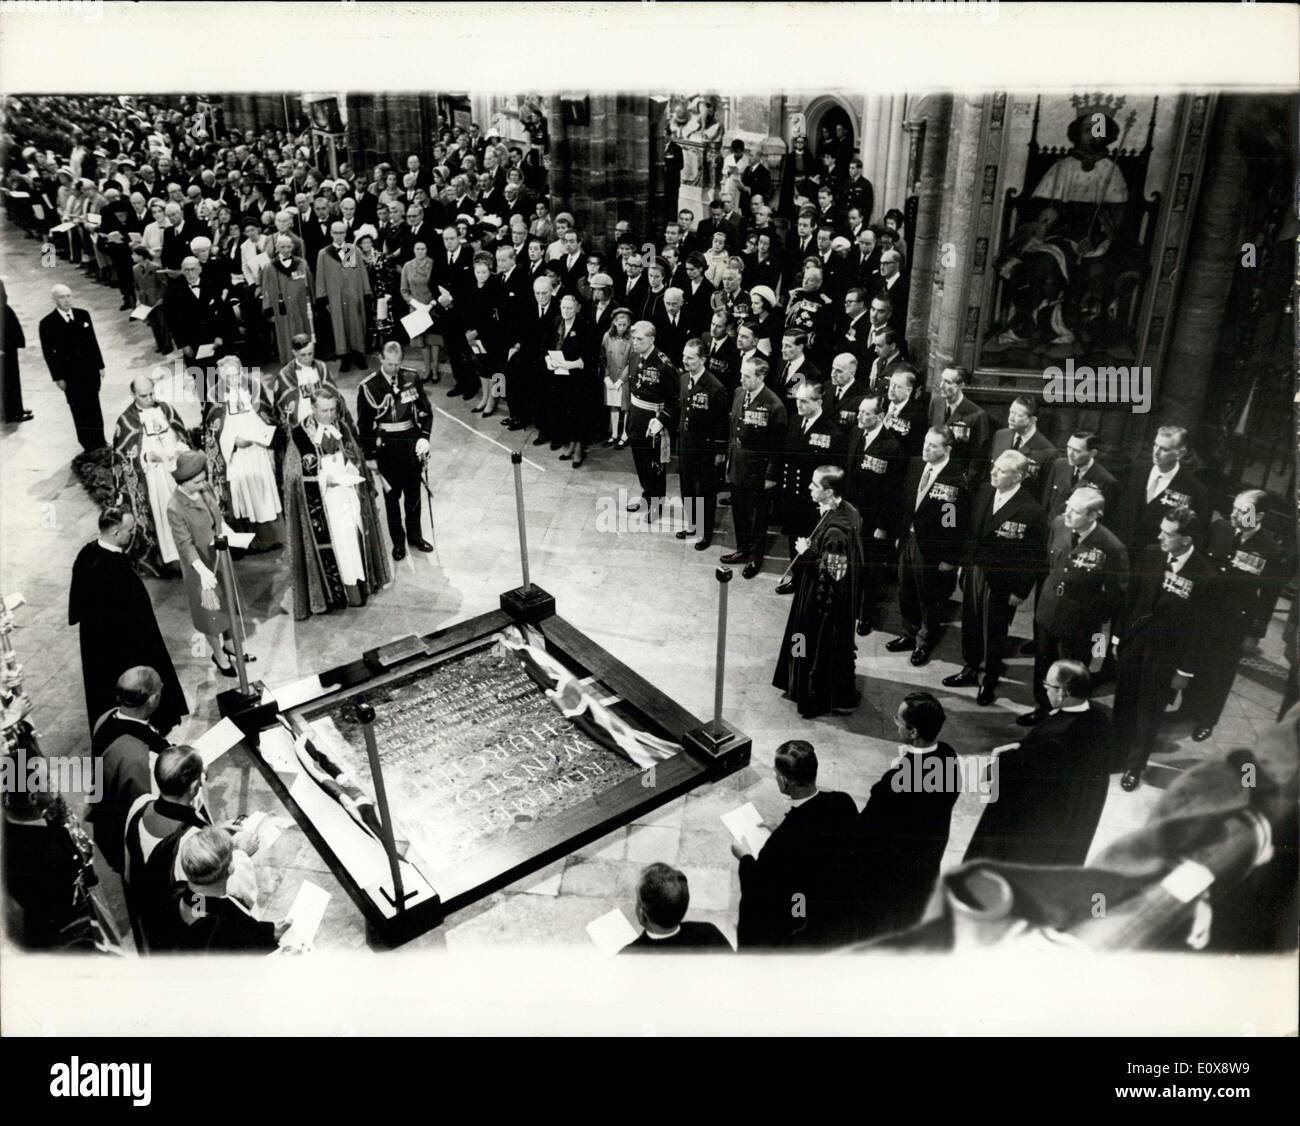 Sep. 19, 1965 - Battle Of Britain Service At Westminster Abbey Attended By The Queen And Duke Of Edinburgh: The Queen and Duke of Edinburgh attended the Battle of Britain Thanksgiving service in Westminster Abbey this morning, after the service the Queen Unveiled a Commemorative Tablet to Sir Winston Churchill at the West end of the Abbey Lady Spencer-Churchill and other members of the Churchill family attended. And after the unveiling the Queen meet 20 of the Battle of Britain Pilots who flew into battle 25, years ago Stock Photo